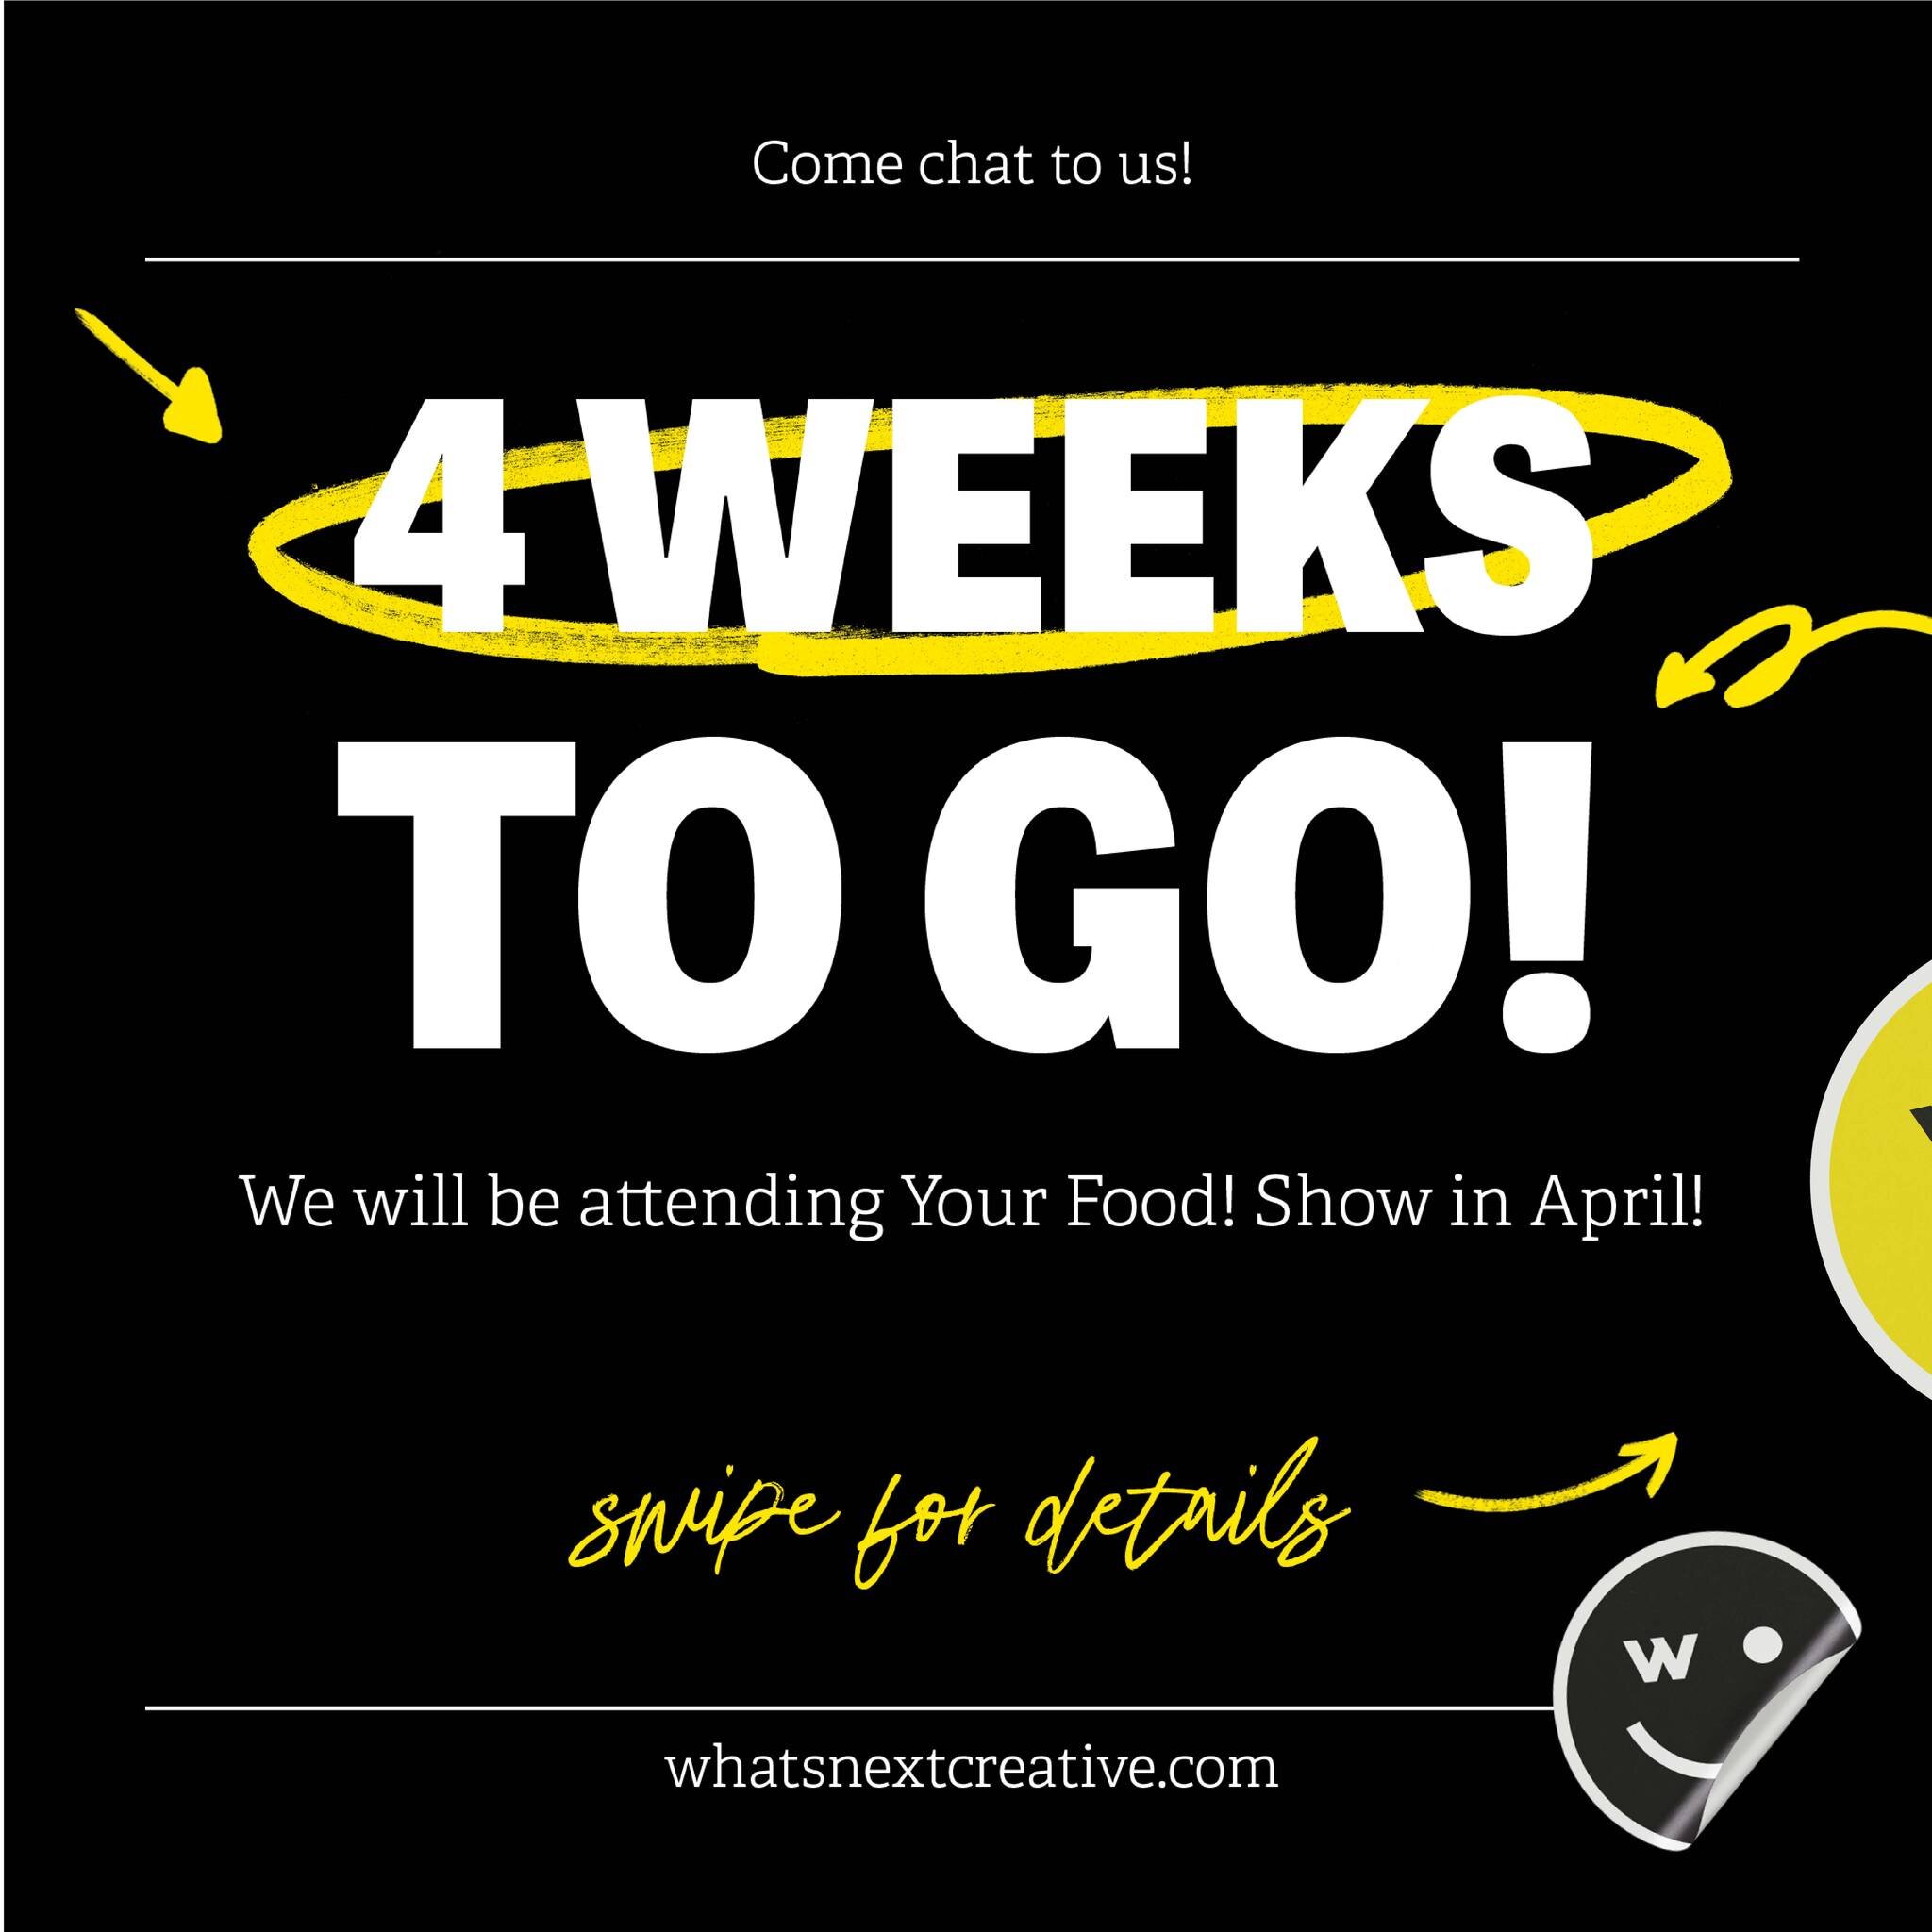 ✨4 weeks to go ✨ until the your Food! Show in Coleraine in April! Come and visit us to chat all things creative on Wednesday 17th April. We'll be there from 10am-5pm, make sure to stop by to have a chat and of course to sample some tasty things!

Reg